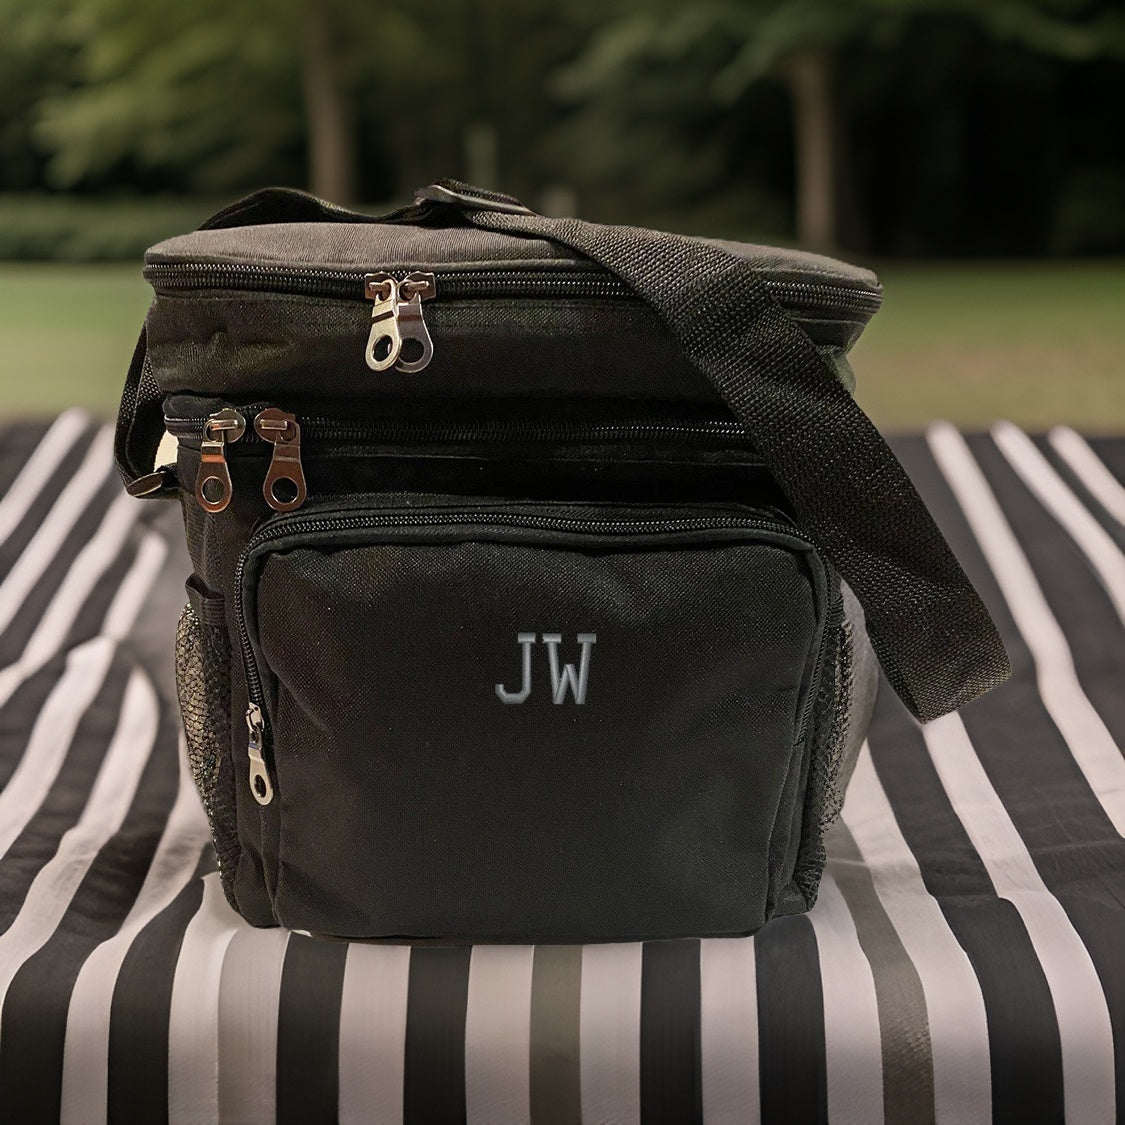 Personalized Picnic Cooler